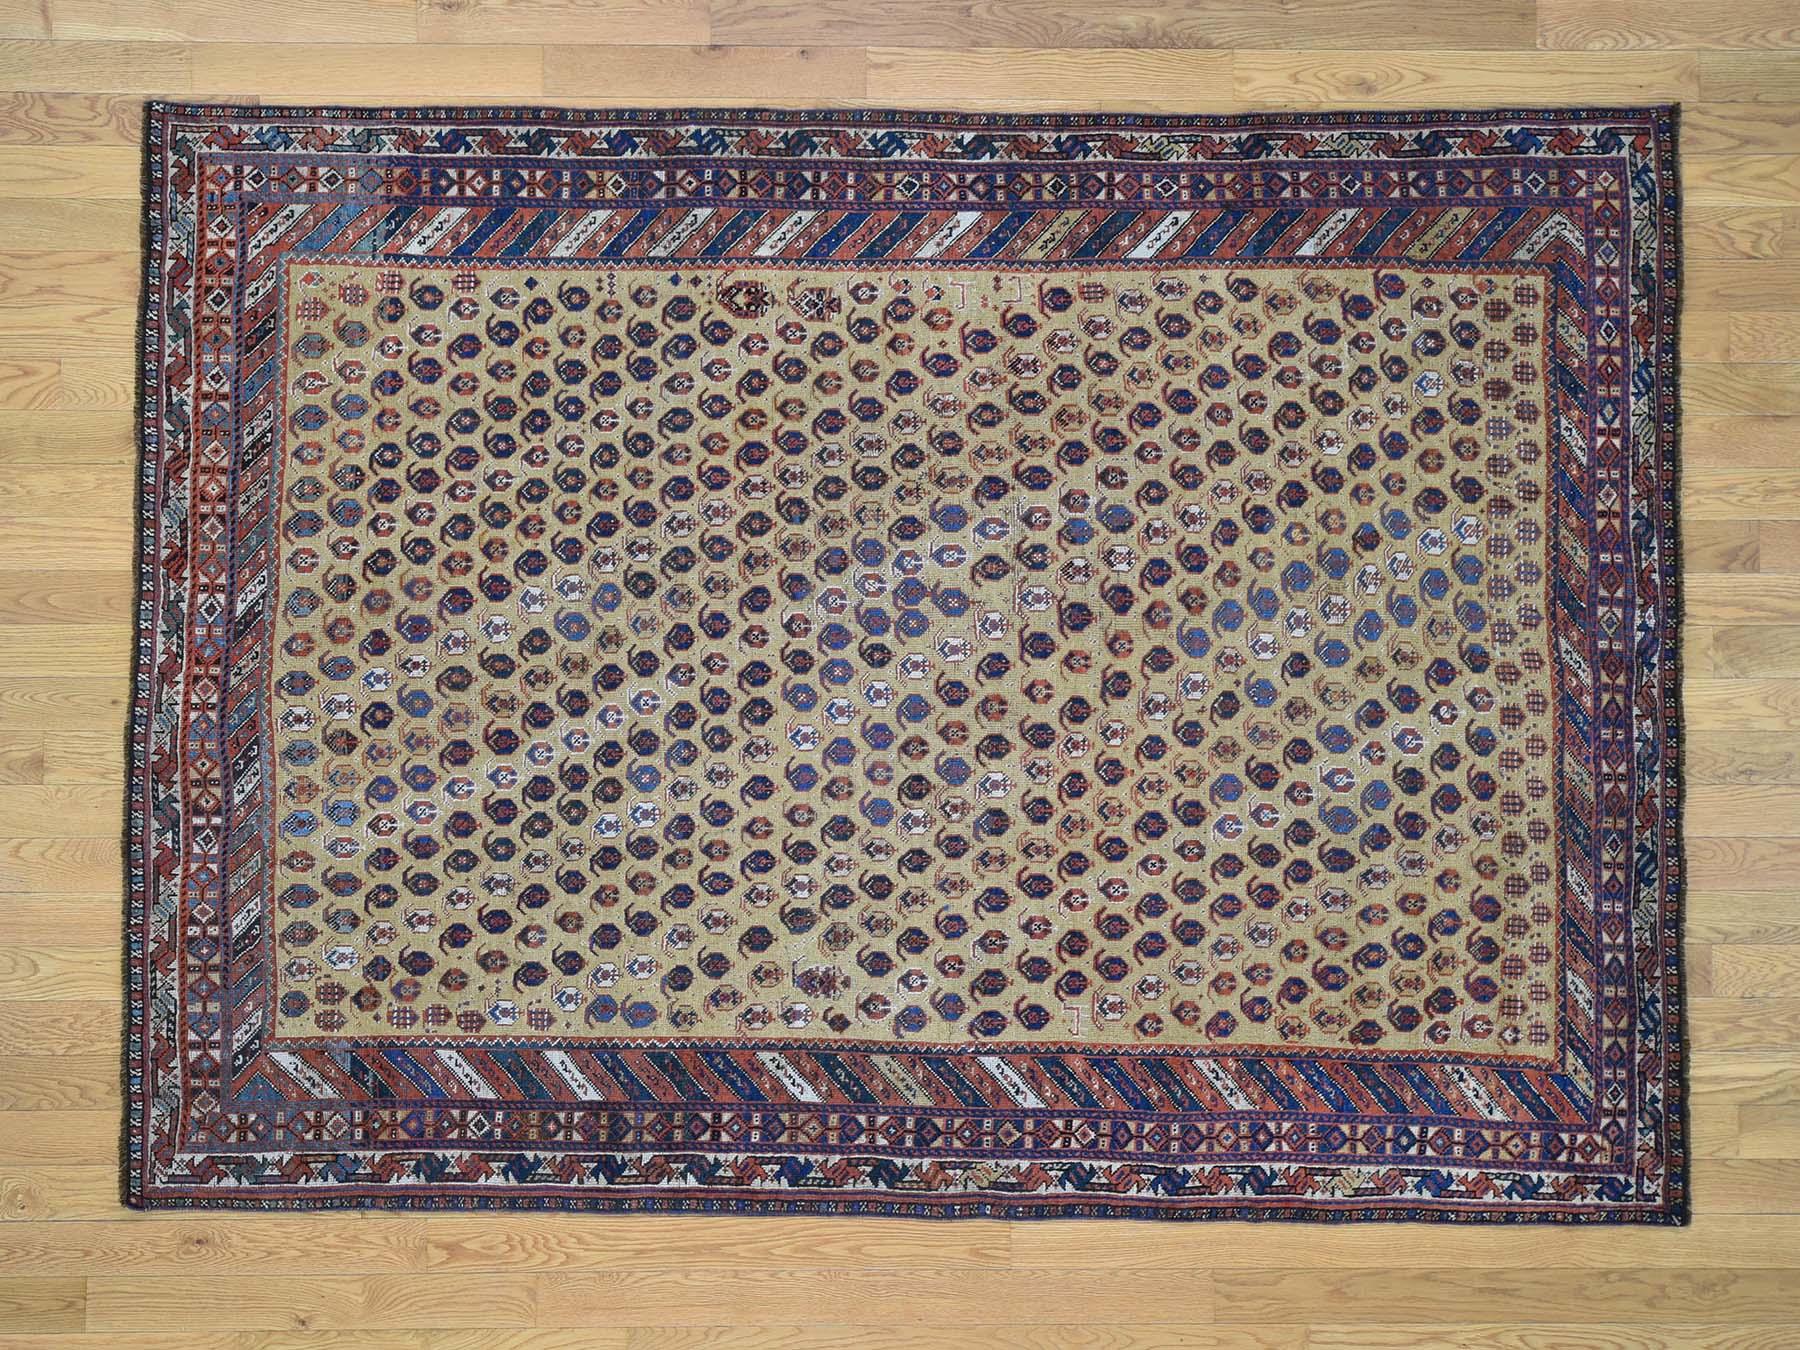 This is a genuine hand knotted oriental rug. It is not hand tufted or machine made rug. Our entire inventory is made of either hand knotted or handwoven rugs.

Start a new room with this superb antique carpet. This handcrafted Persian Afshar, is